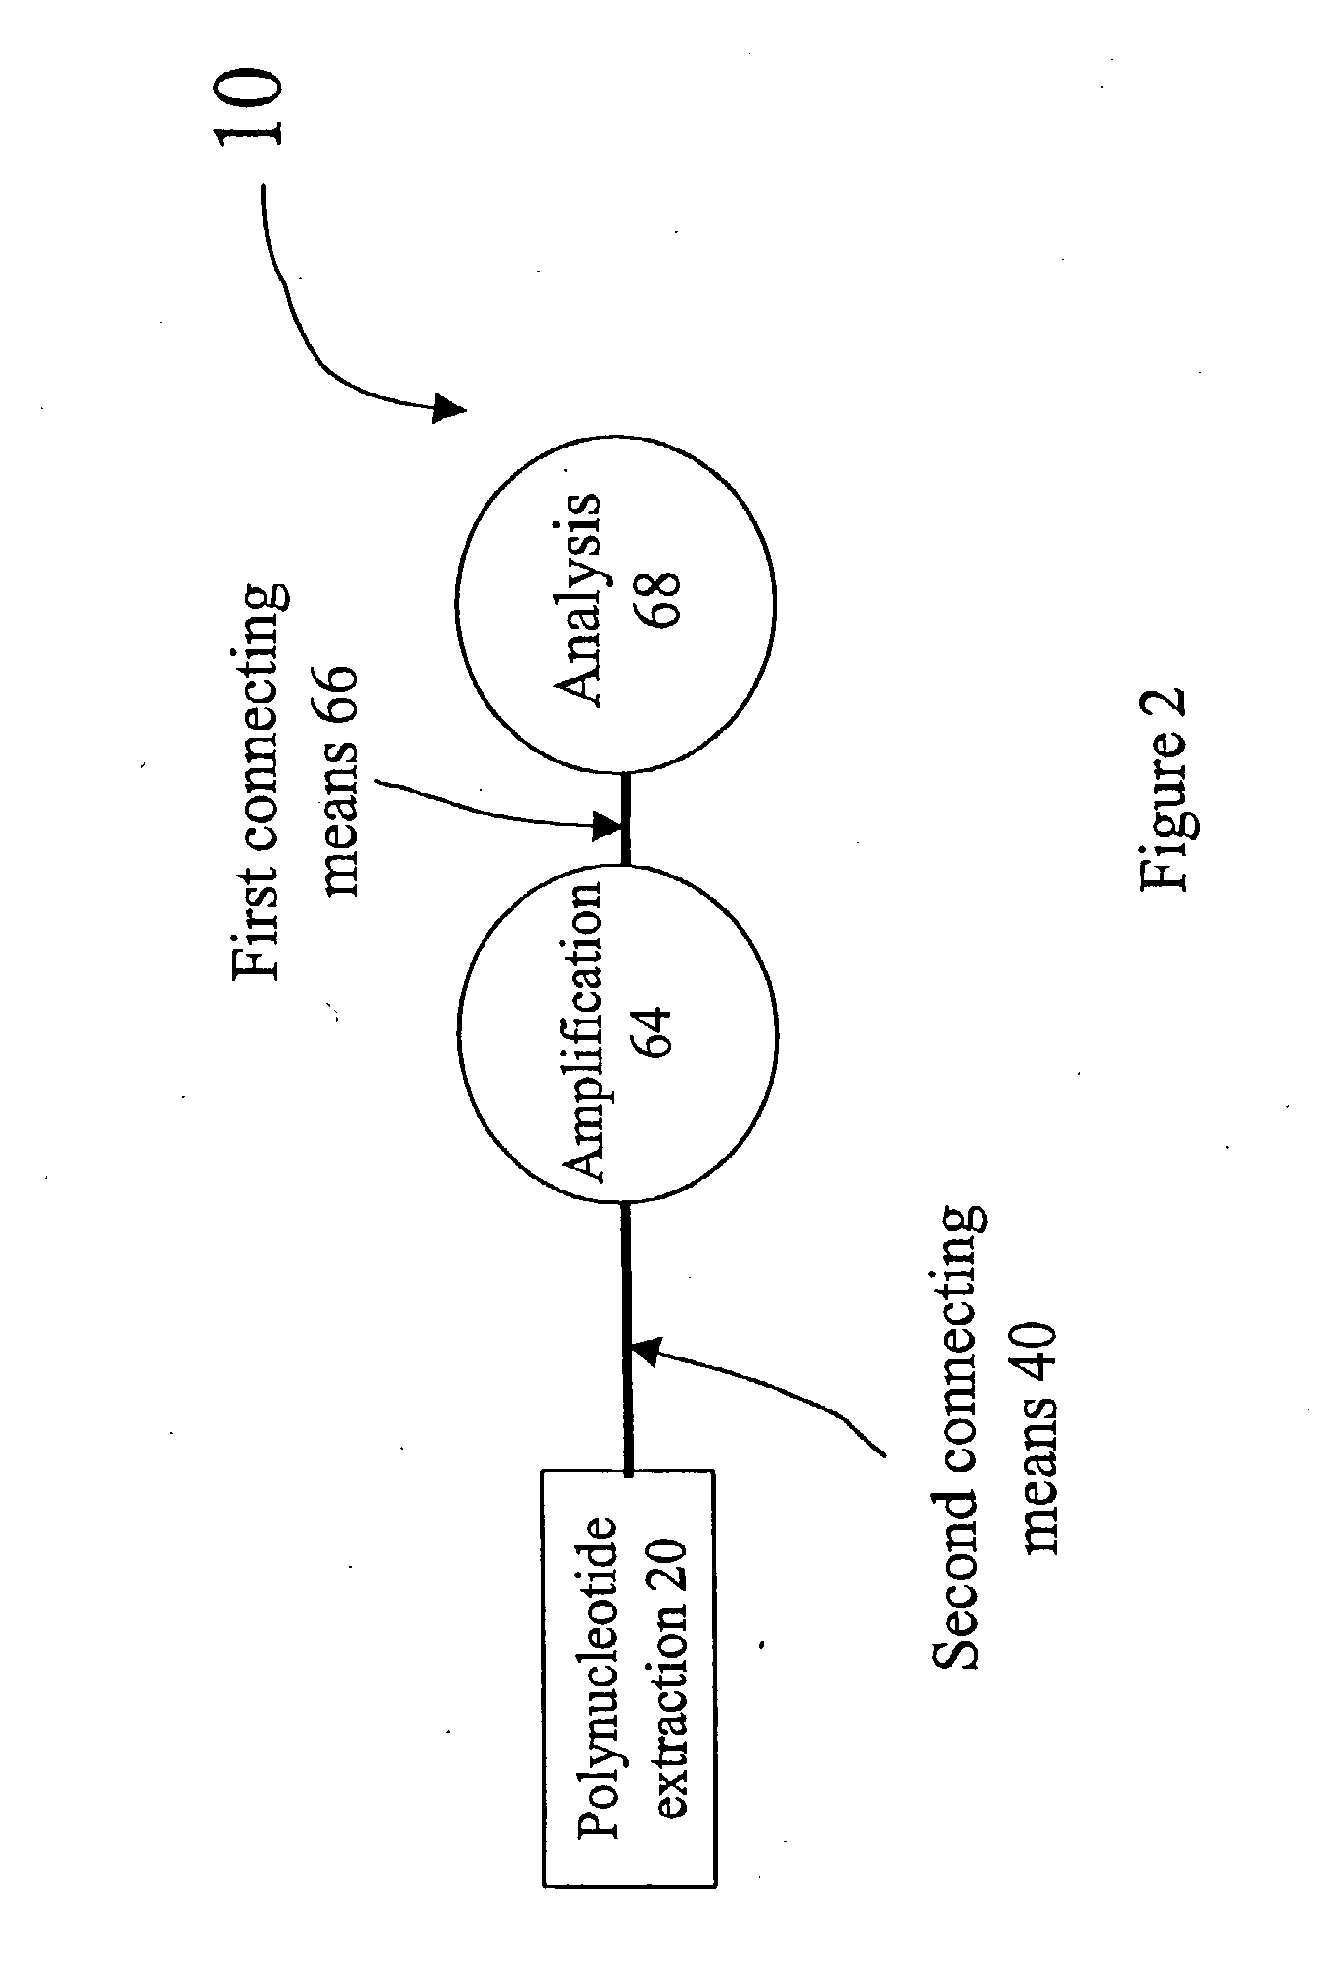 Apparatus for polynucleotide detection and quantitation